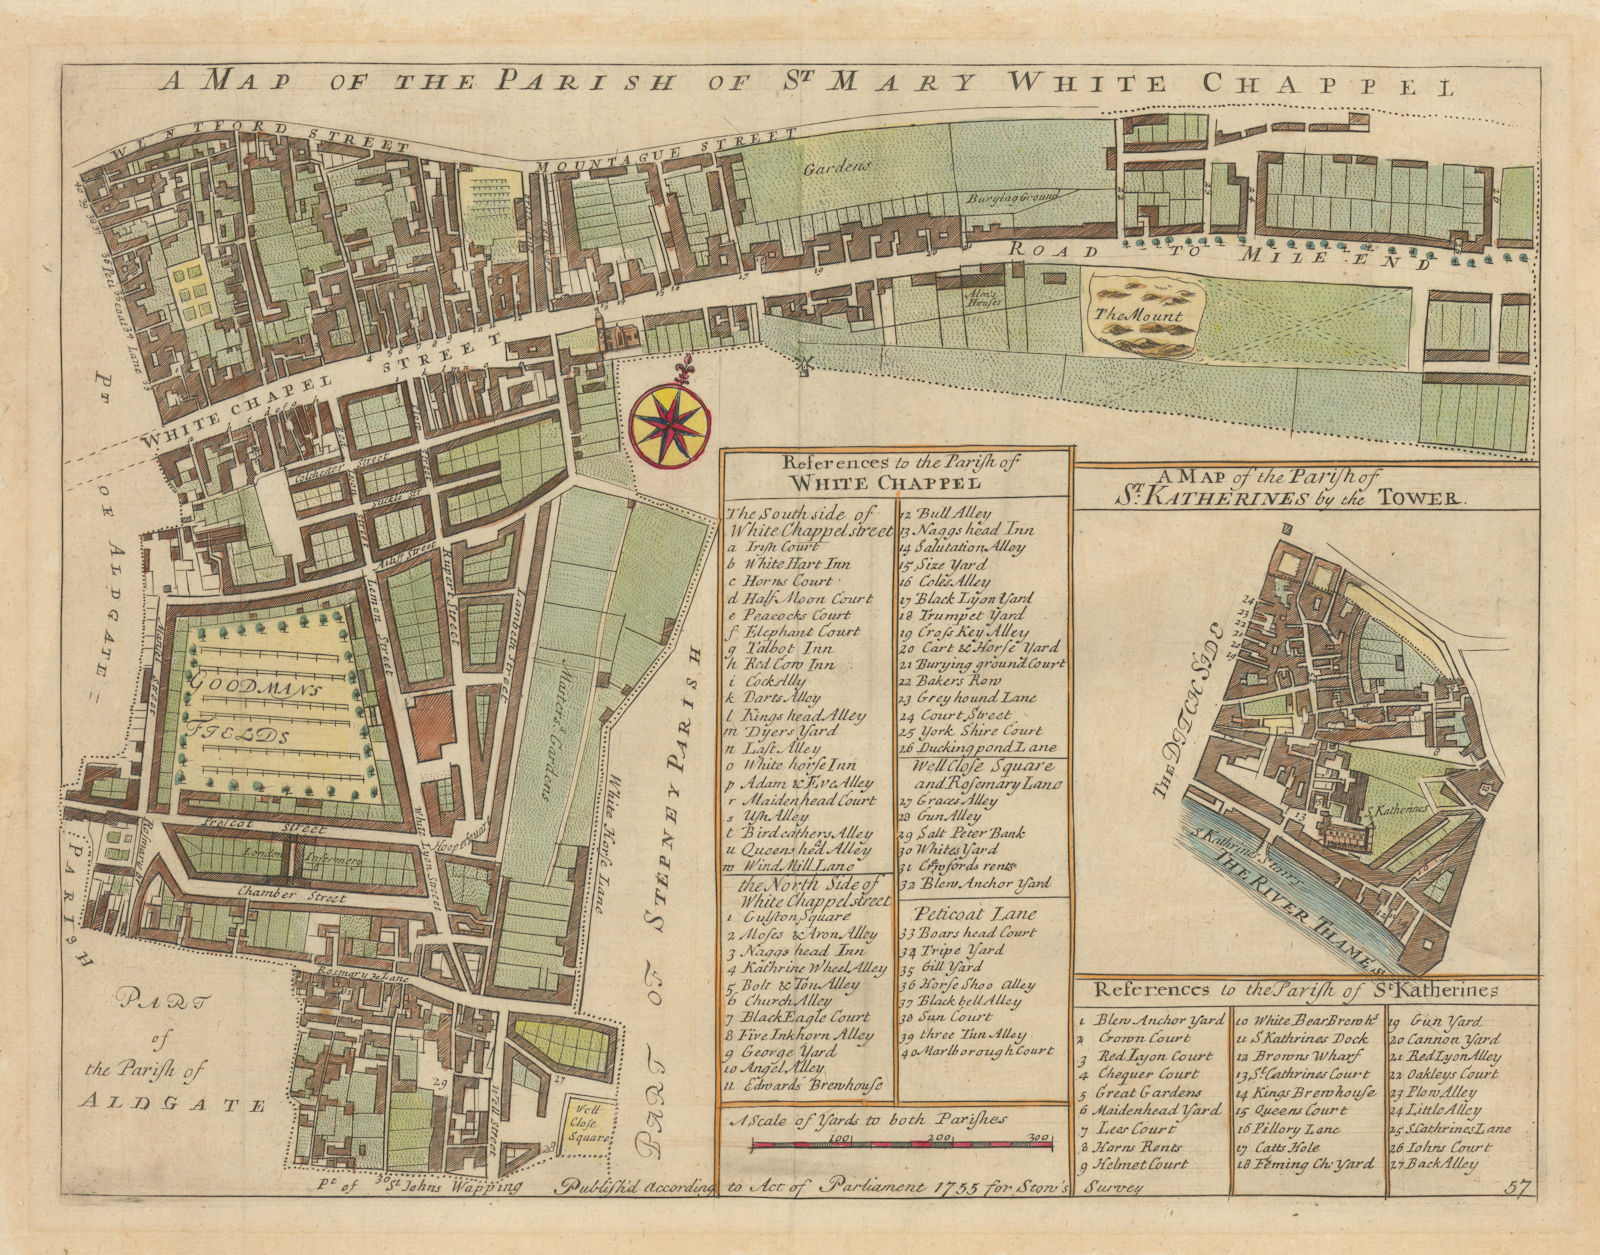 Parishes of St Mary, Whitechapel & St Katherine's/Tower. STOW/STRYPE 1755 map